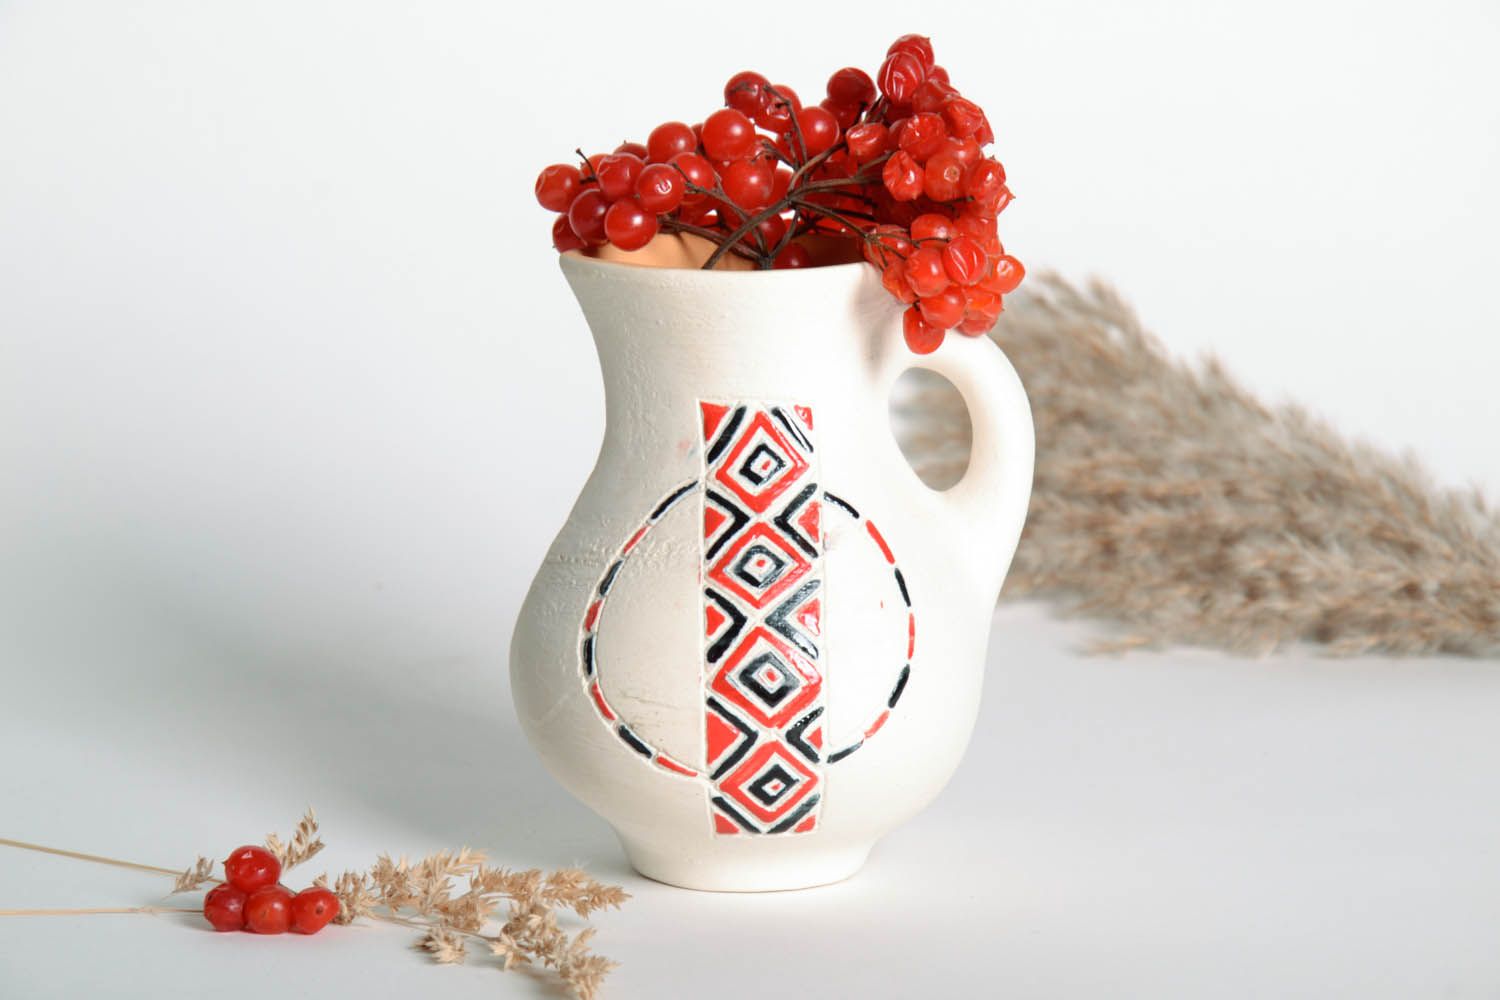 15 oz ceramic white pitcher with handle and decorative ornament 0,75 lb photo 1